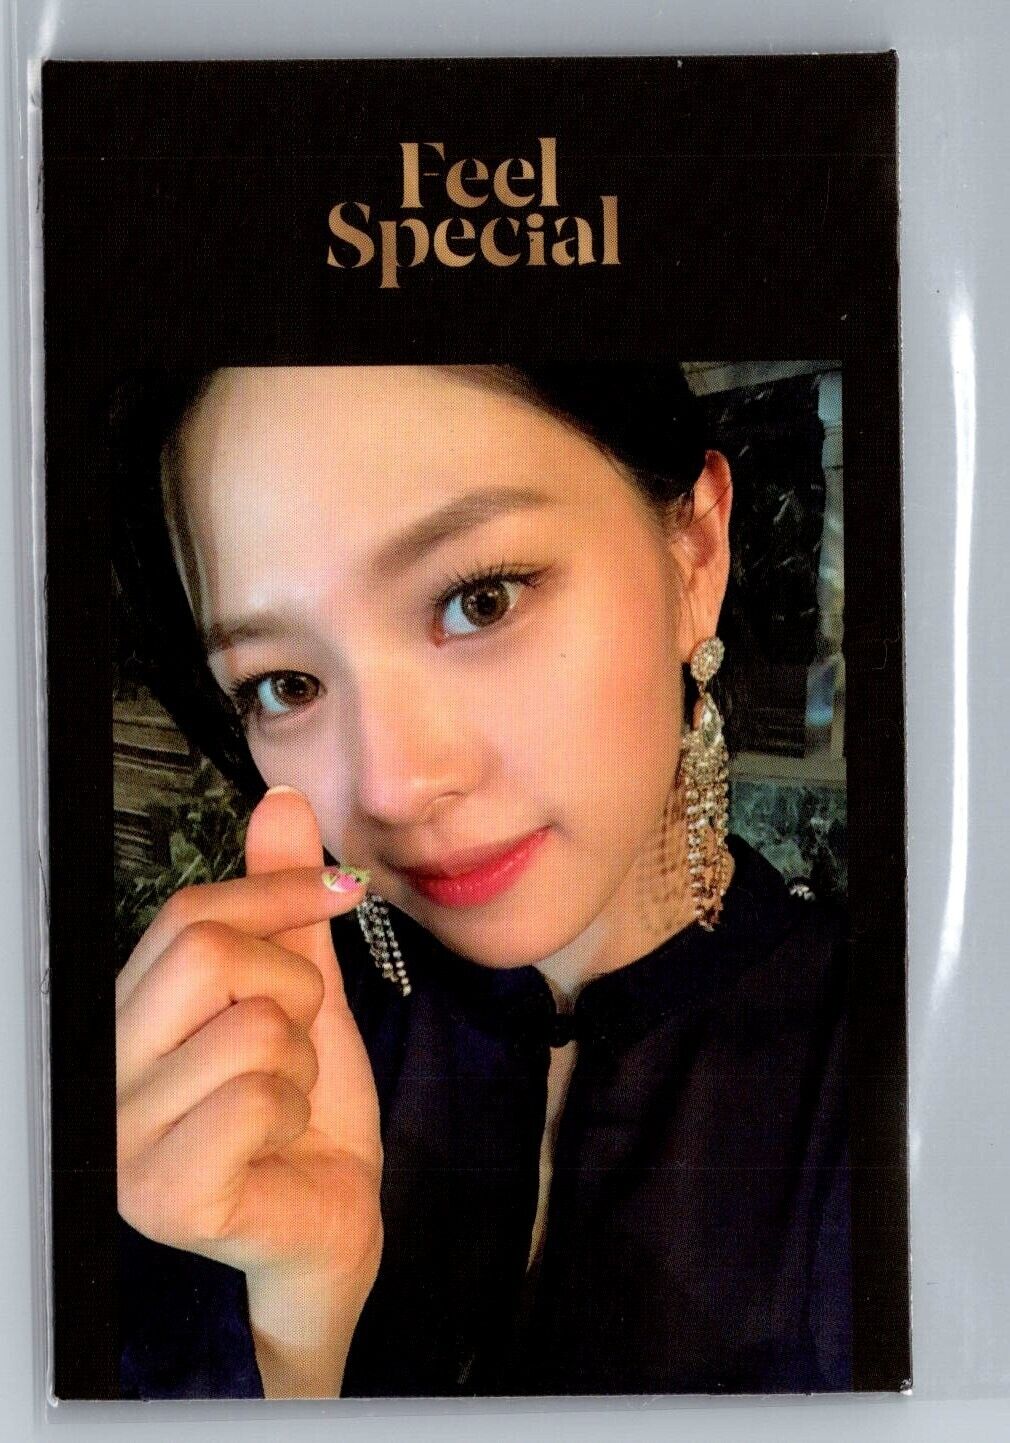 TWICE- JEONGYEON FEEL SPECIAL OFFICIAL ALBUM PHOTOCARD (US SELLER)